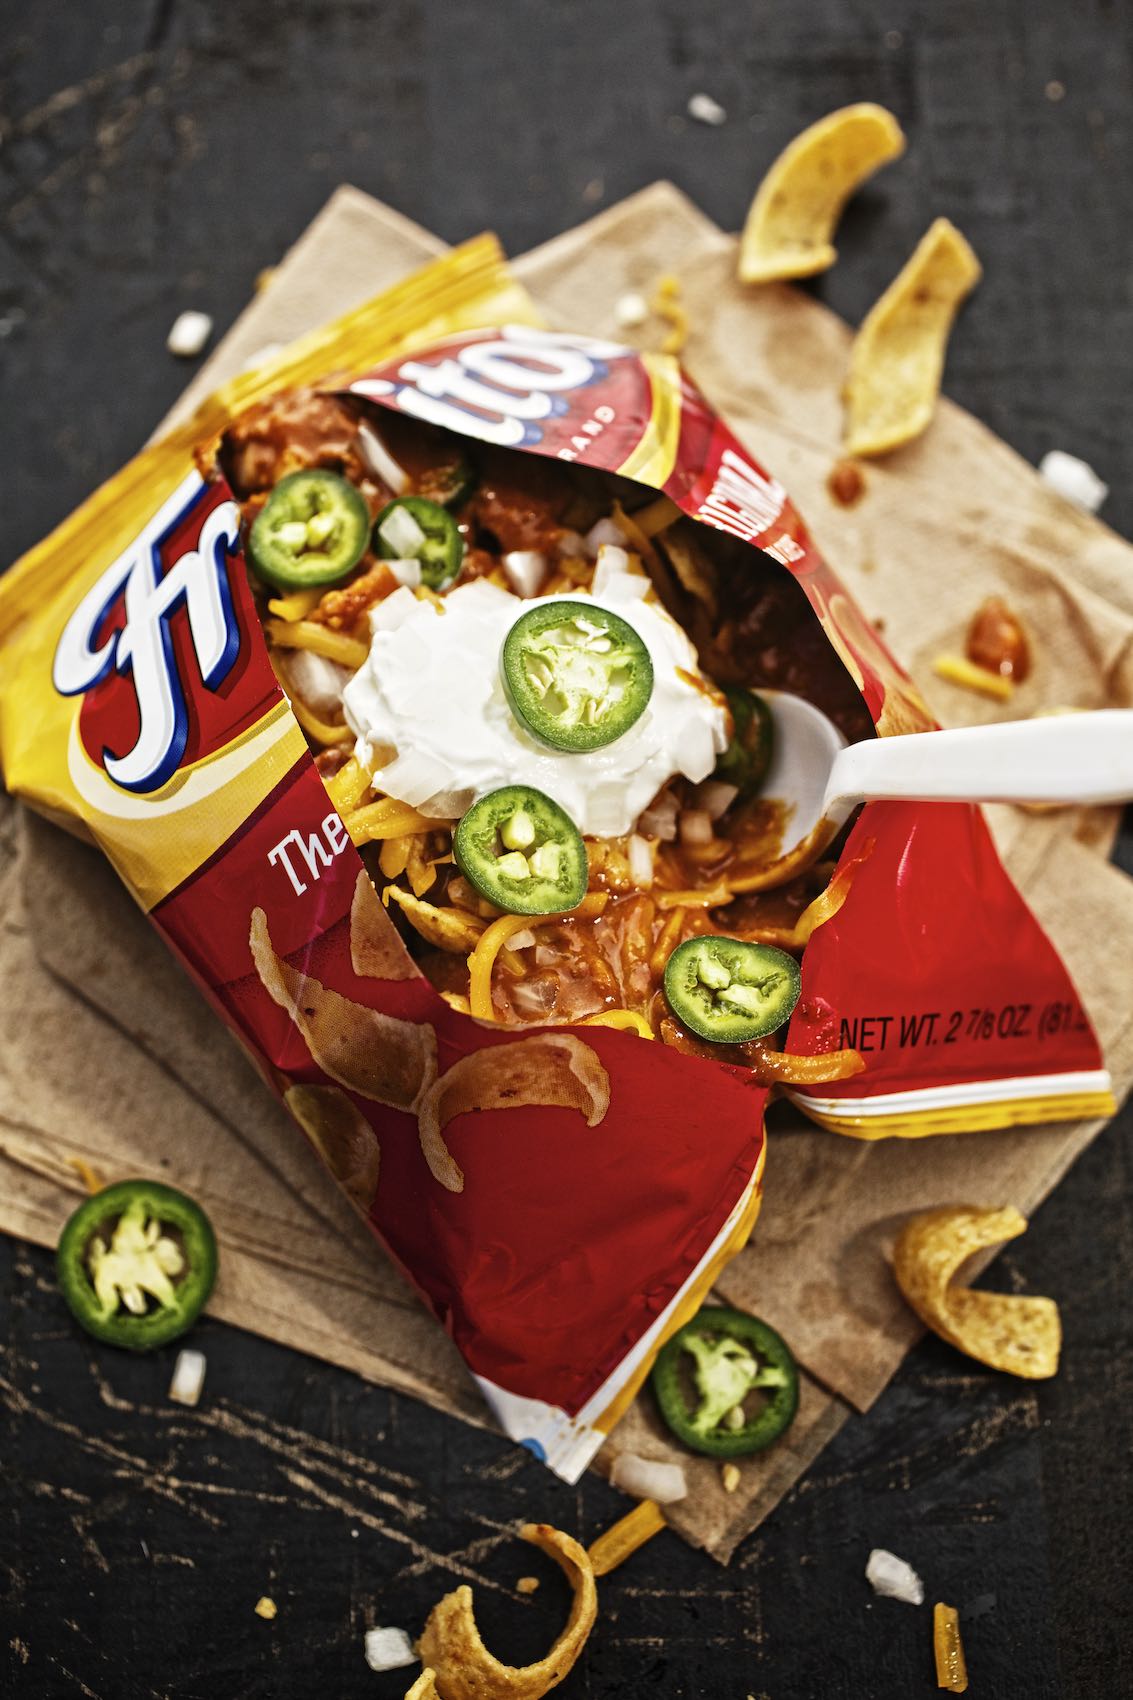 Jody Horton Photography - Frito pie served in Fritos bag with toppings, against black surface. 